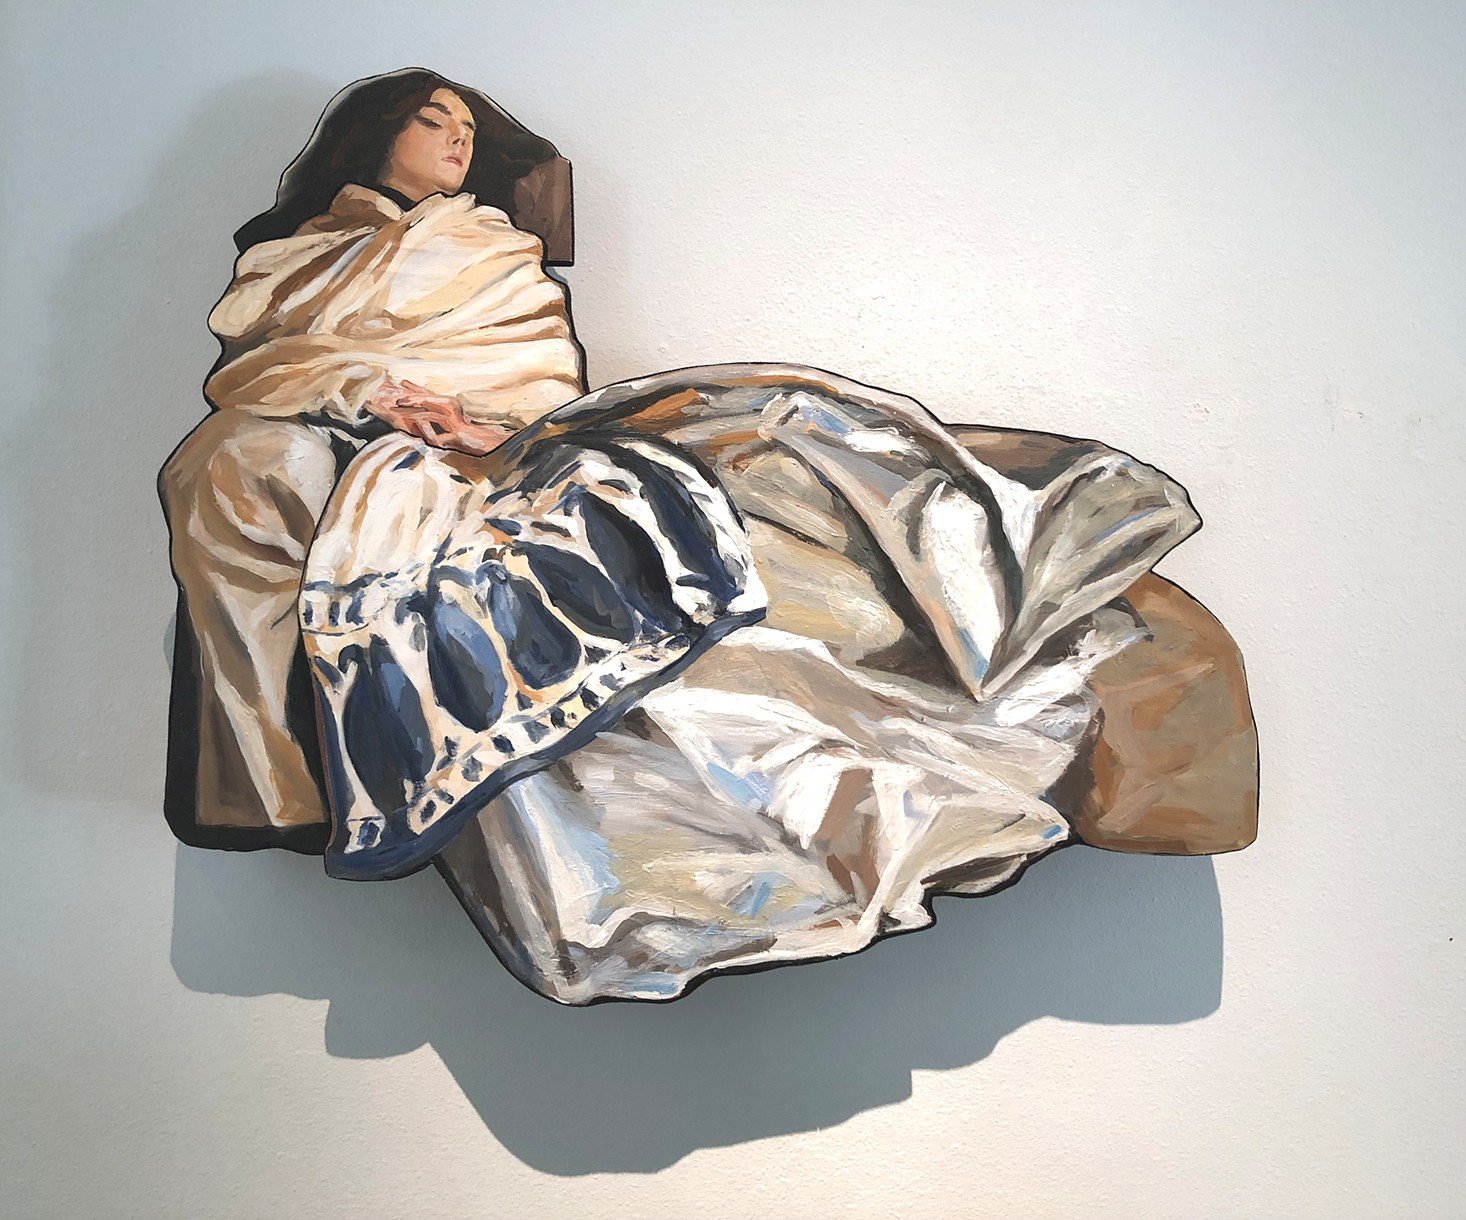    Repose: After Singer Sargent  , oil on canvas, wood, brass, 34" x 29" x 6" 